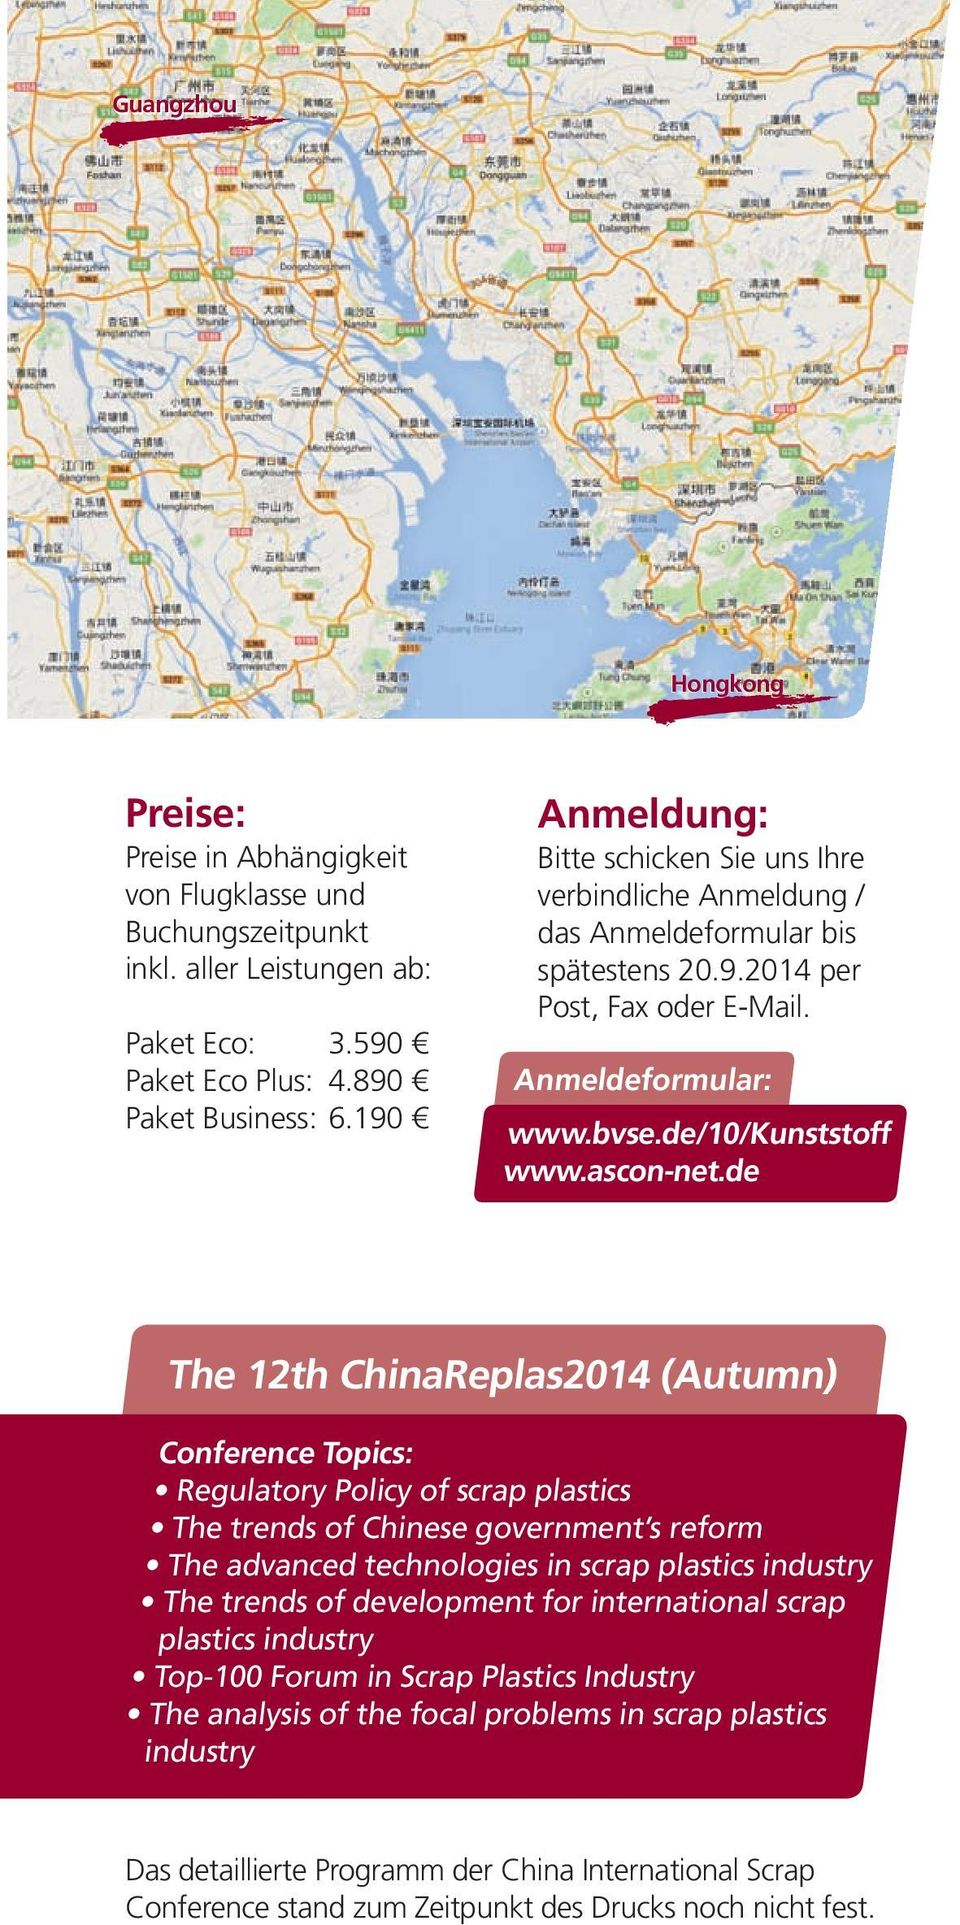 de The 12th ChinaReplas2014 (Autumn) Conference Topics: Regulatory Policy of scrap plastics The trends of Chinese government s reform The advanced technologies in scrap plastics industry The trends